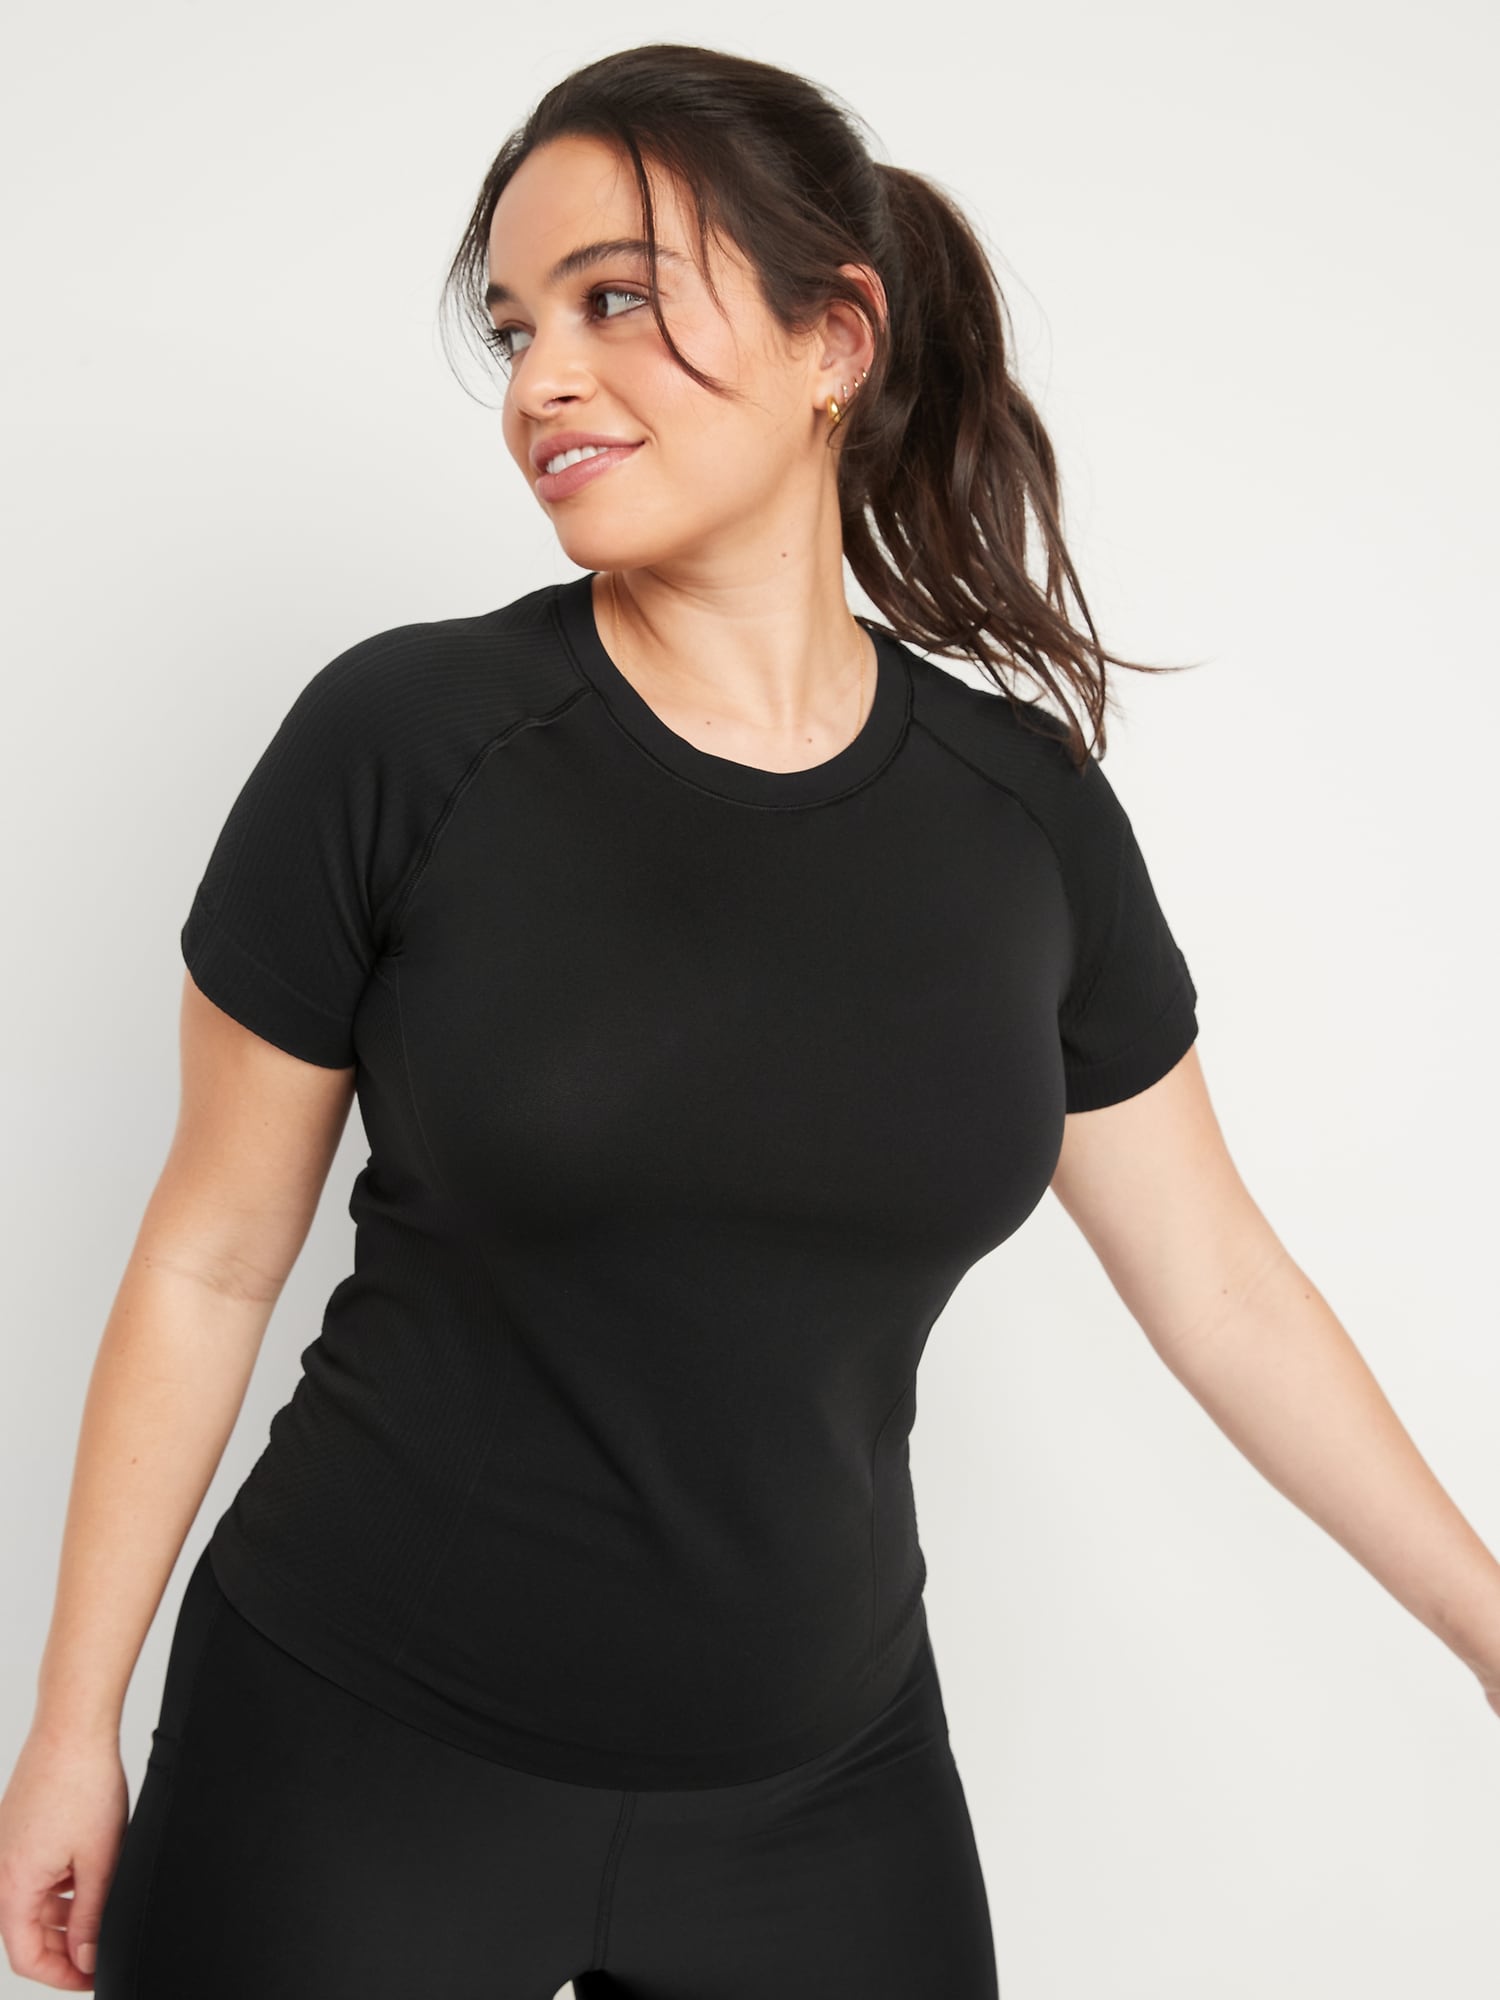 Fitted Seamless Performance T-Shirt